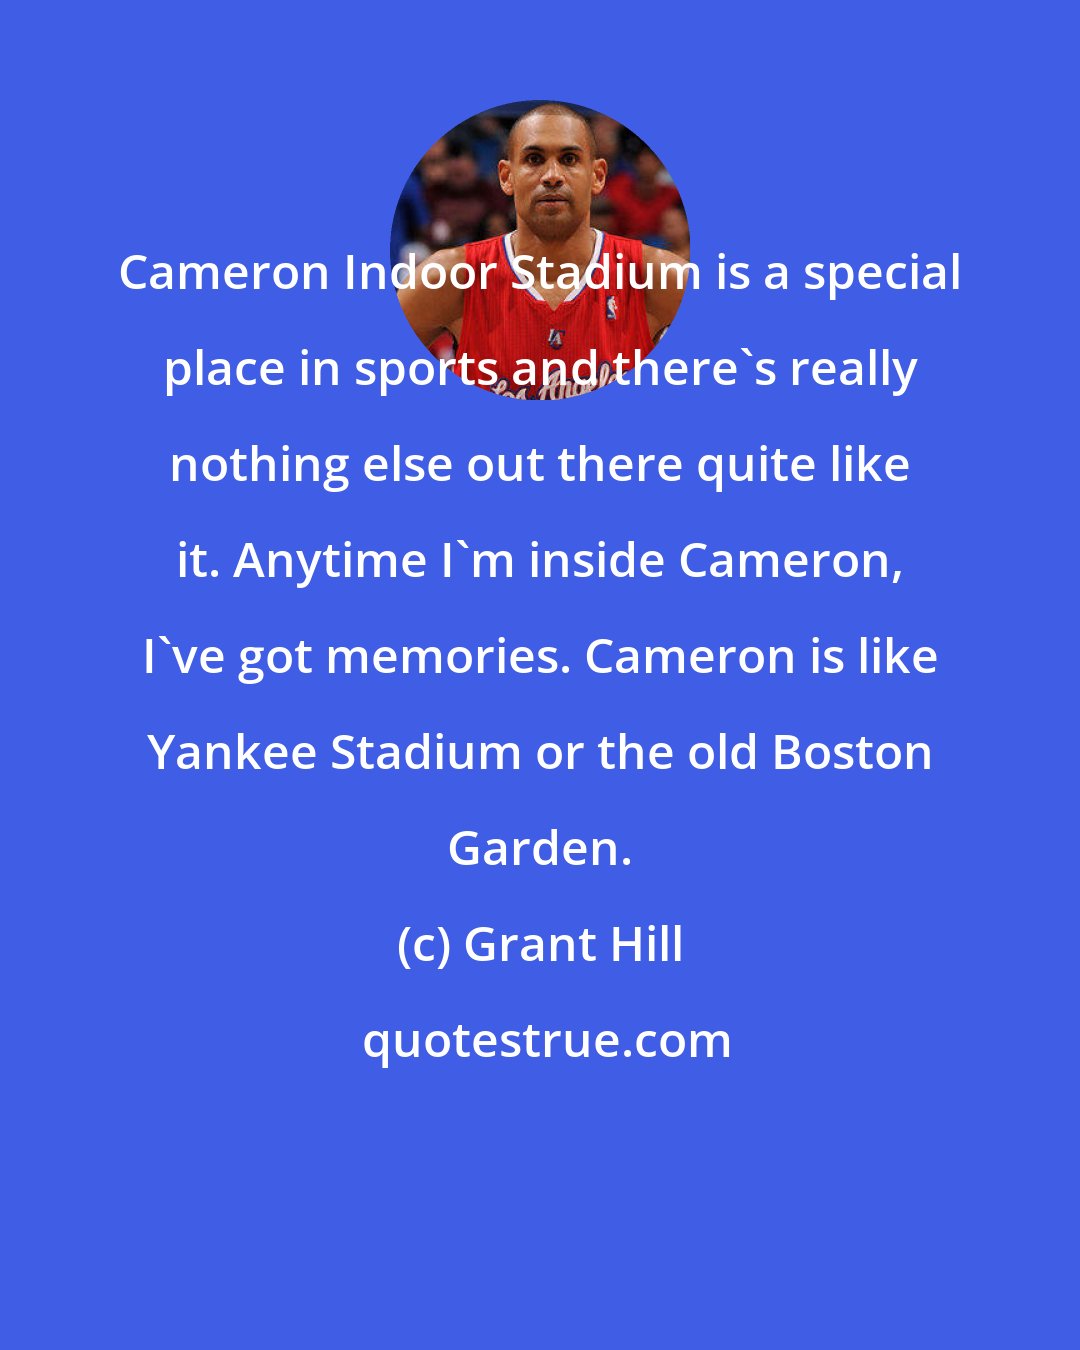 Grant Hill: Cameron Indoor Stadium is a special place in sports and there's really nothing else out there quite like it. Anytime I'm inside Cameron, I've got memories. Cameron is like Yankee Stadium or the old Boston Garden.